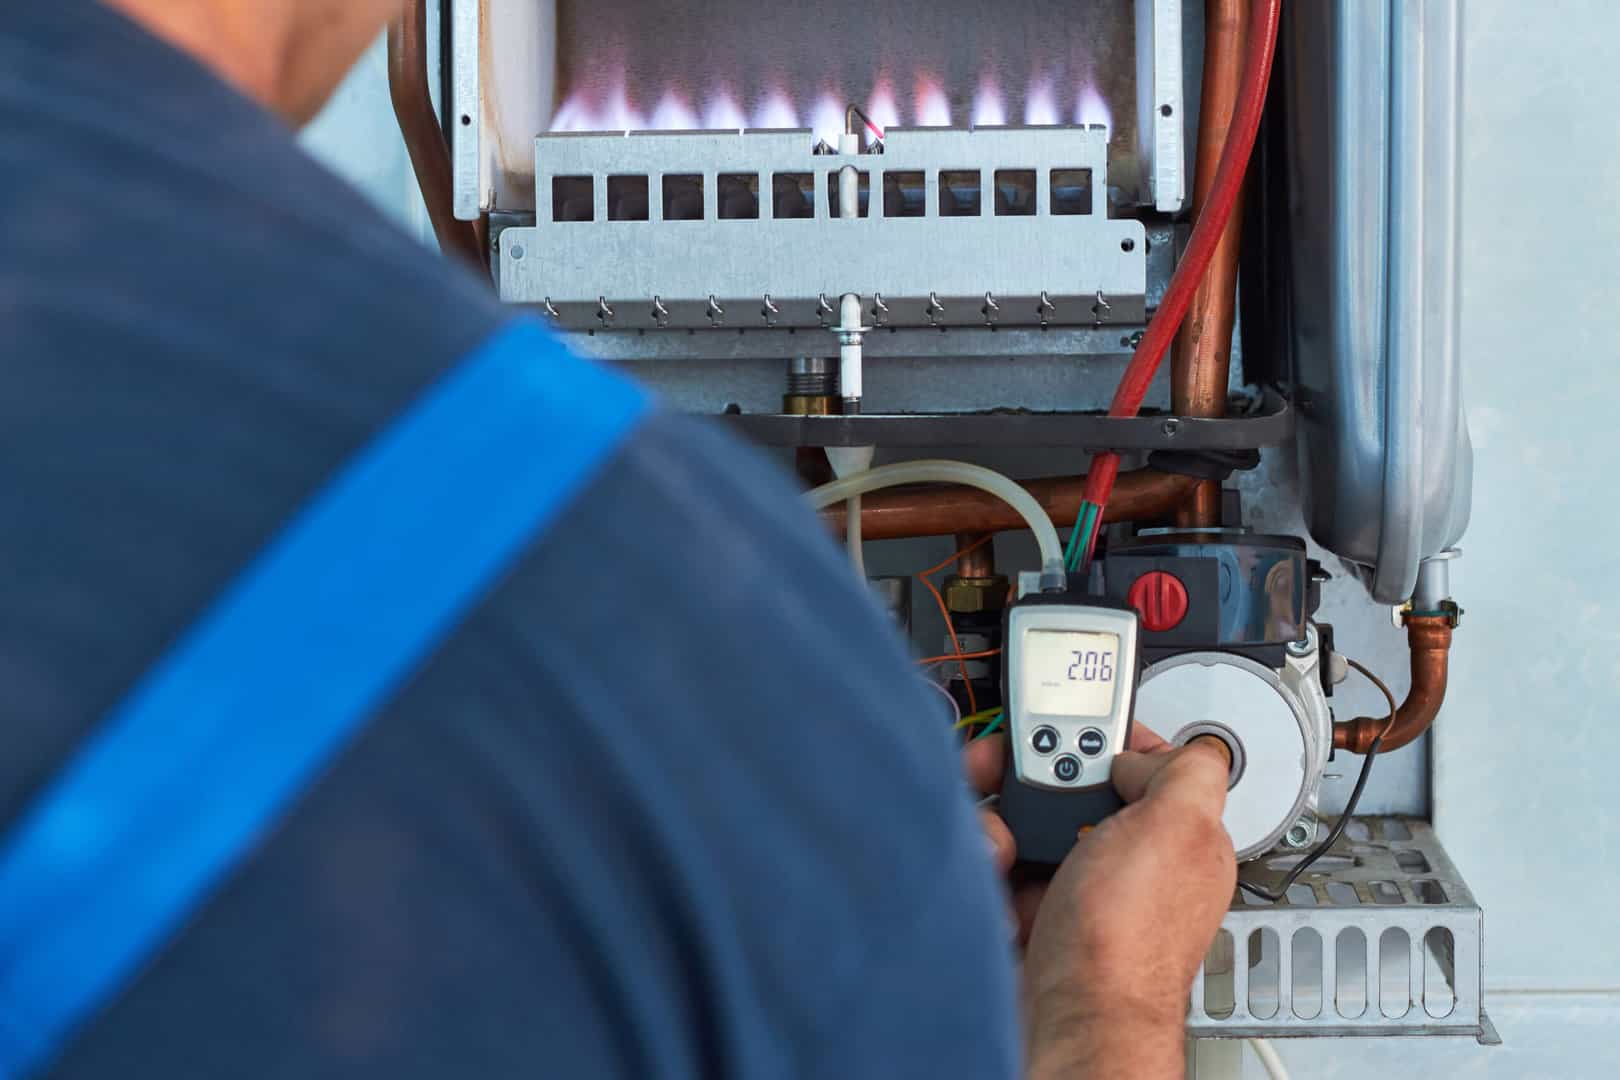 Home Heating Repair West Chicago IL